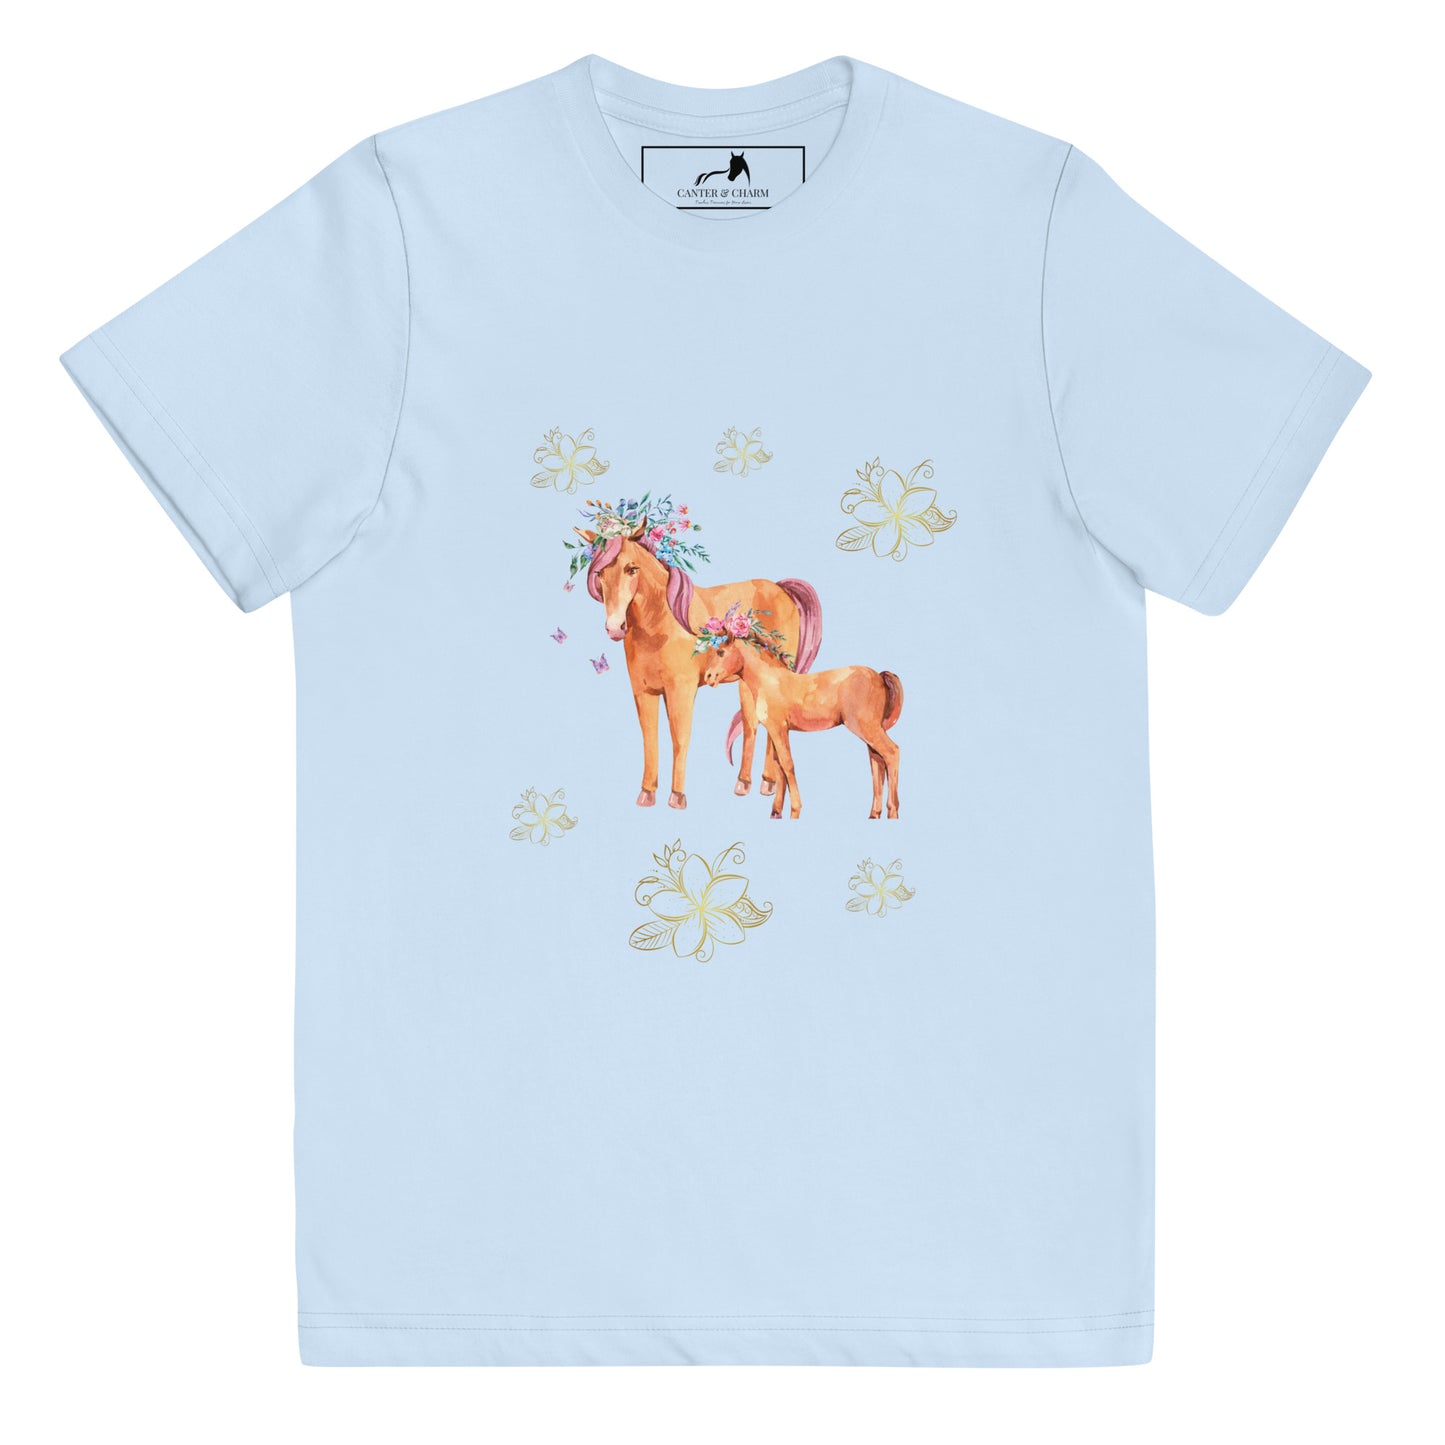 Whimsical Watercolor Horse and Foal Flower Crown Youth Tee - 100% Cotton, Soft Jersey, Equestrian Kids T-Shirt, Horse Lover Gift